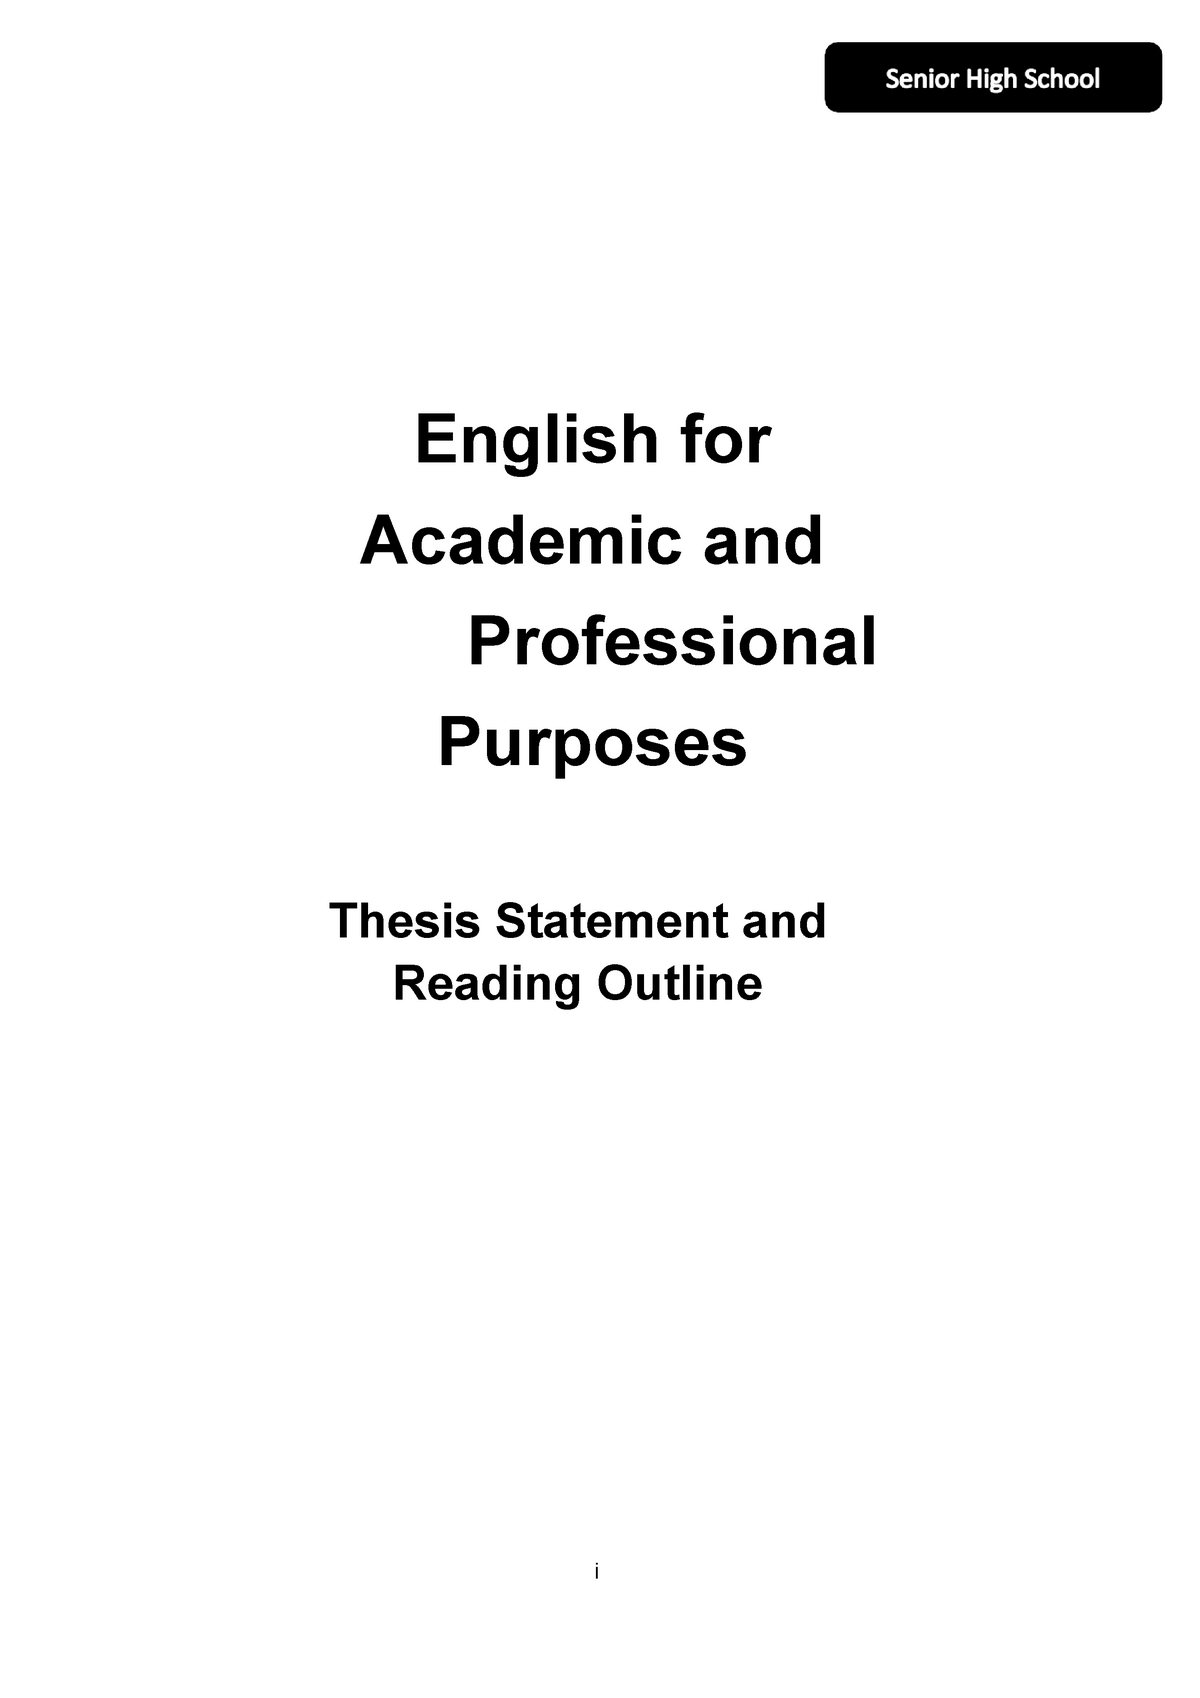 what is thesis statement in eapp